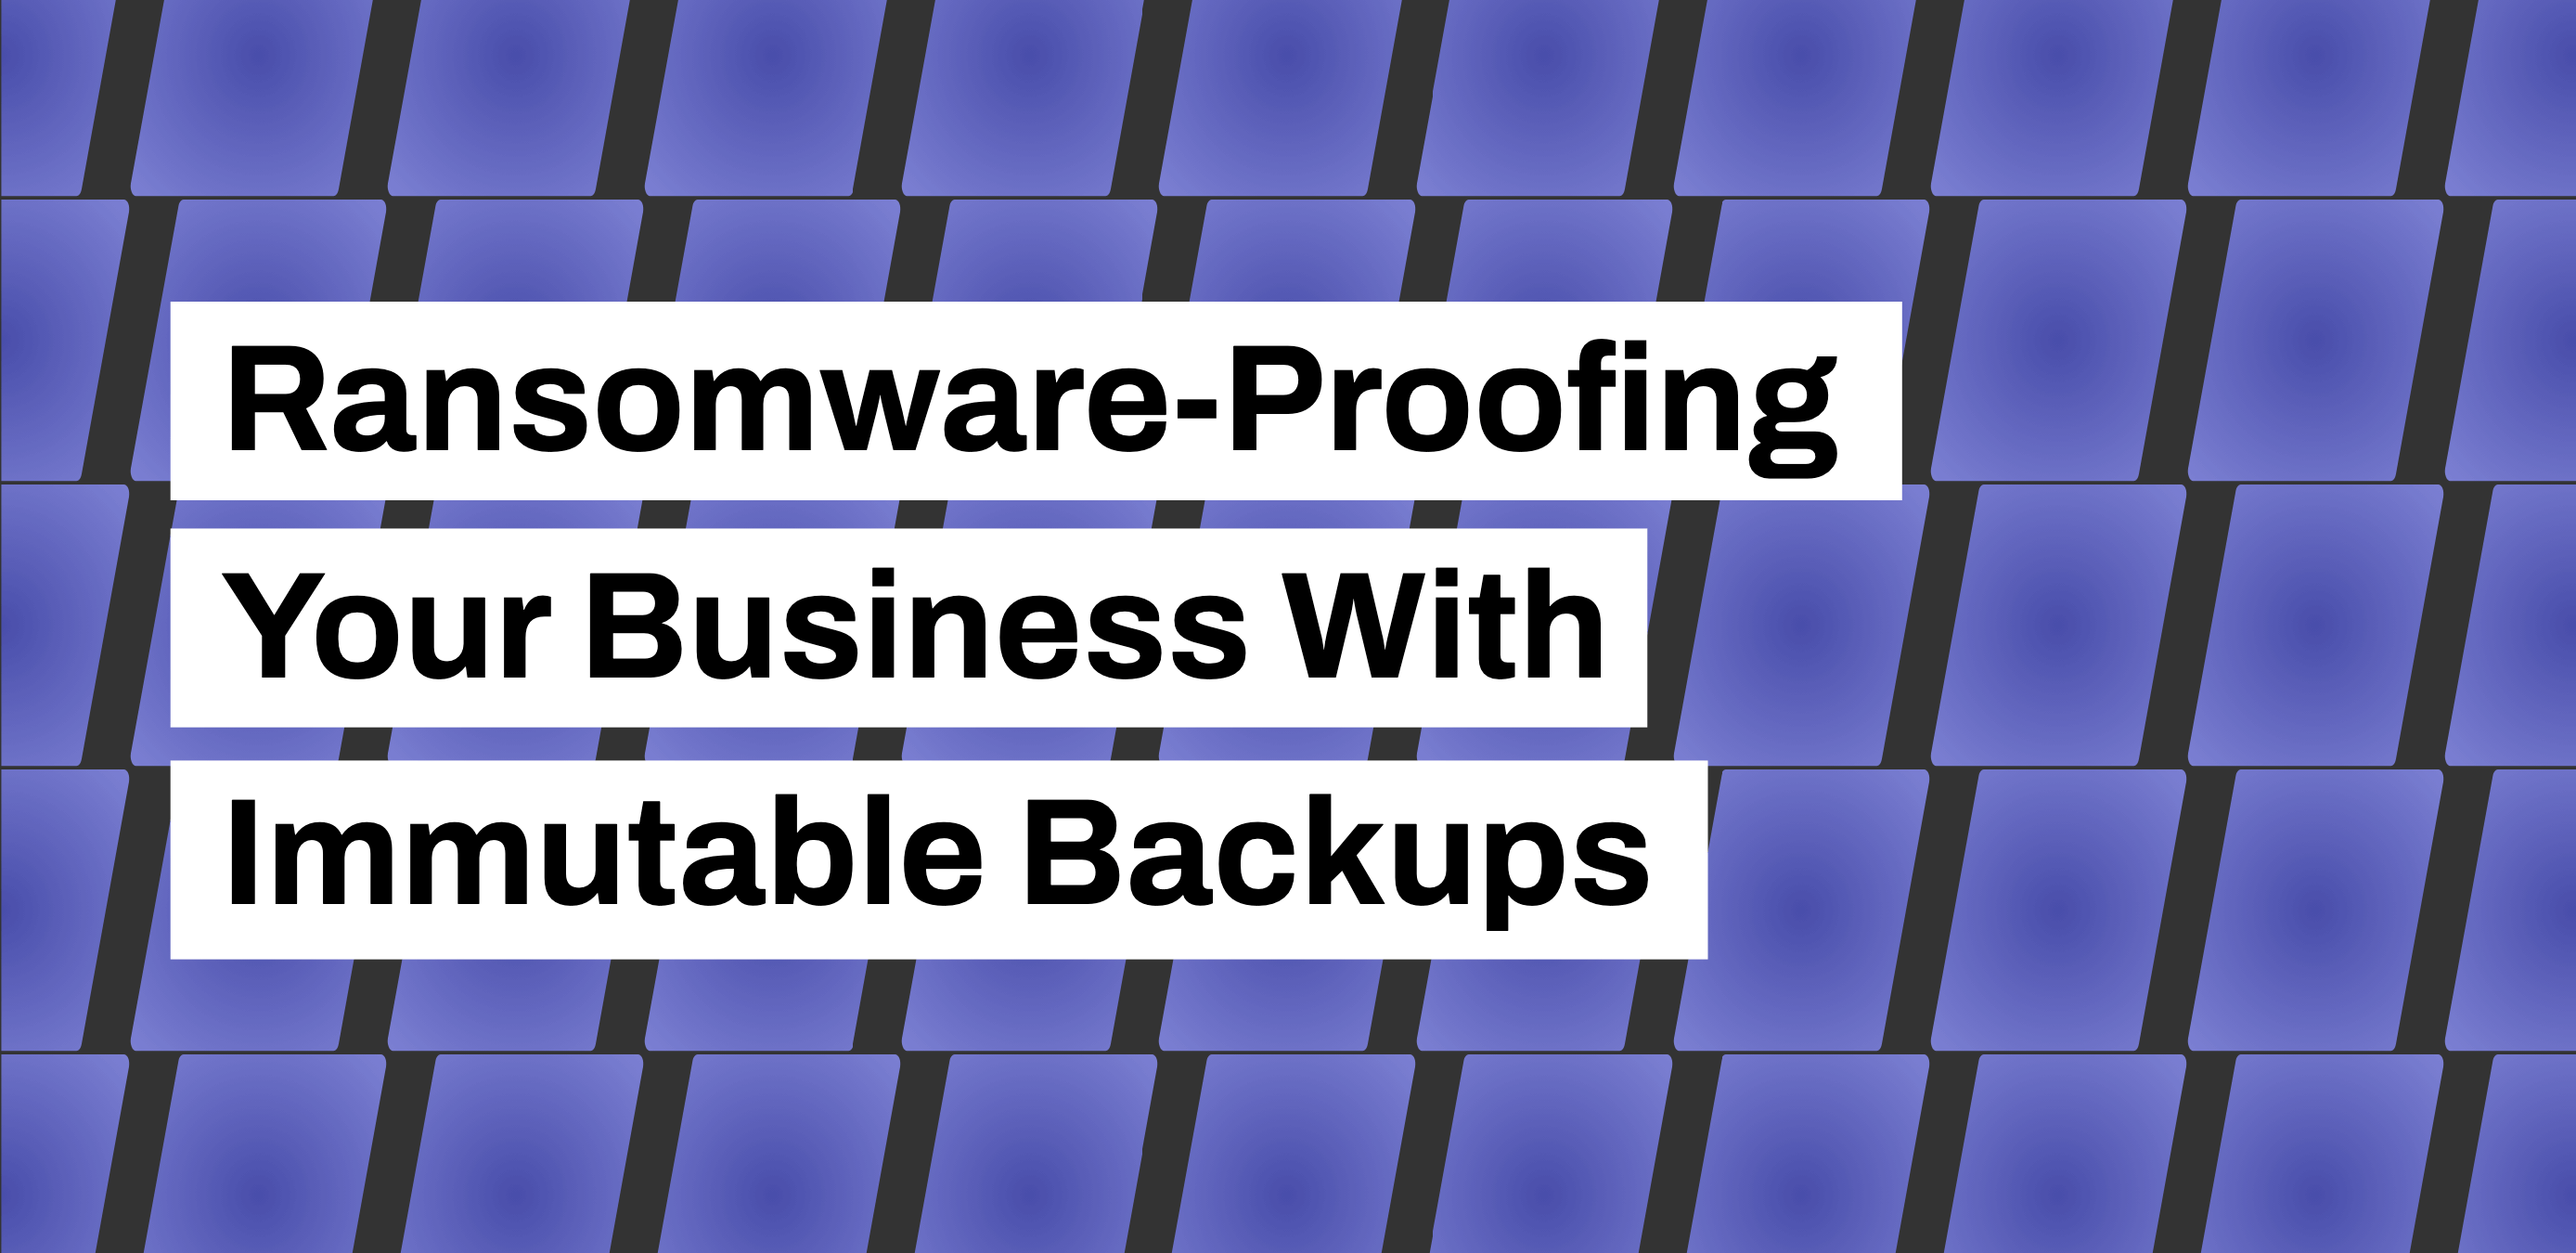 Ransomware-Proofing Your Business With Immutable Cloud Backups